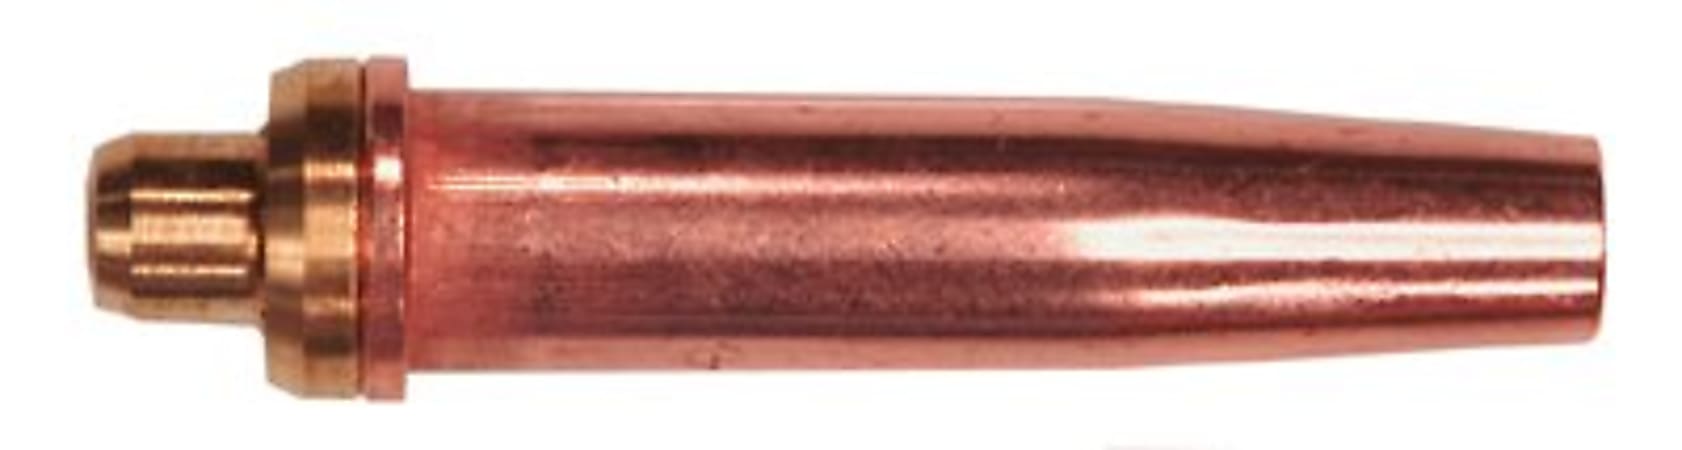 SIZE 4(1/2")GENERAL CUTTING TIP ACETYLENE-O